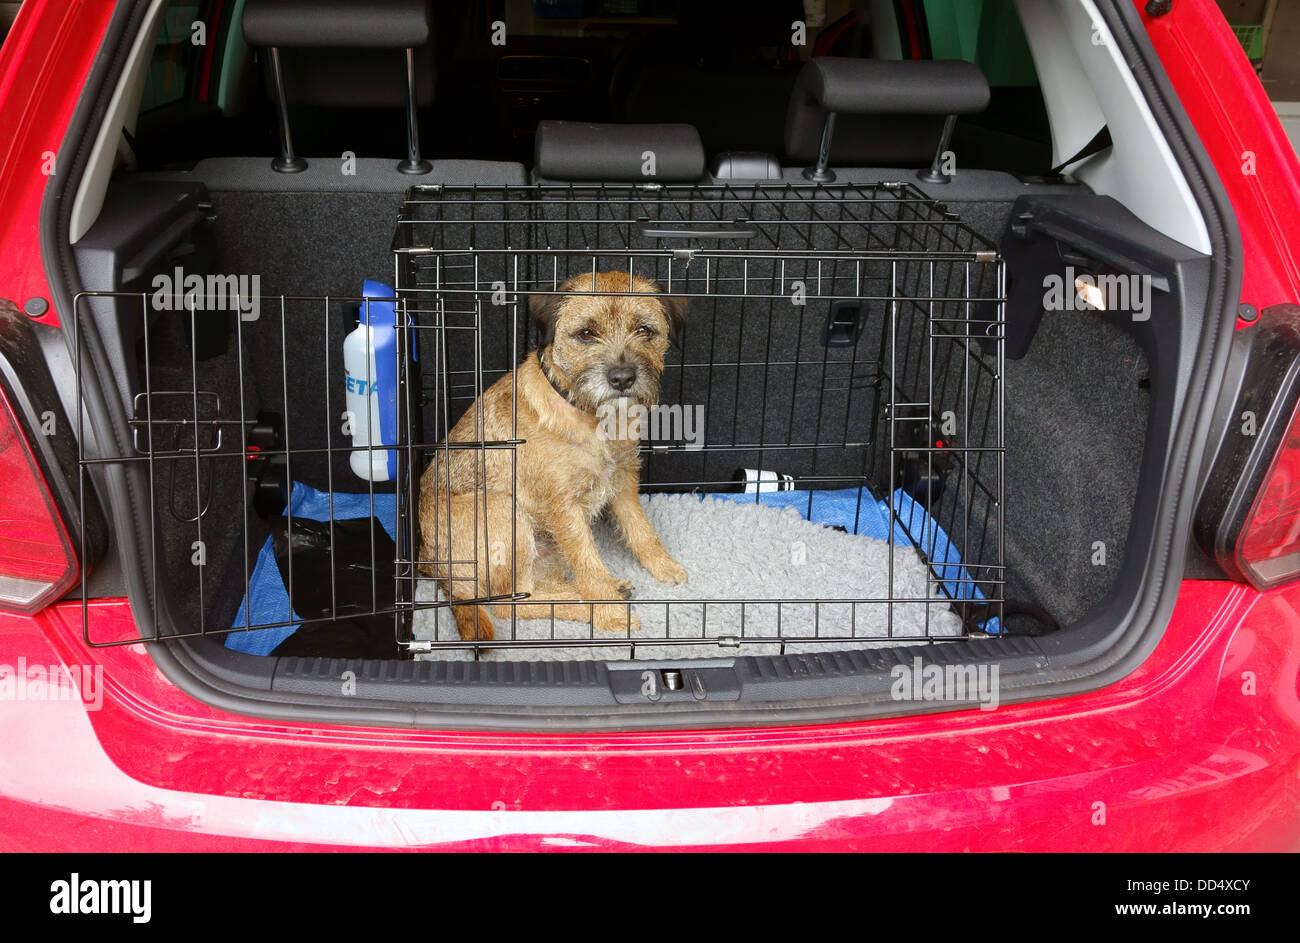 Border terrier dog in travelling cage 